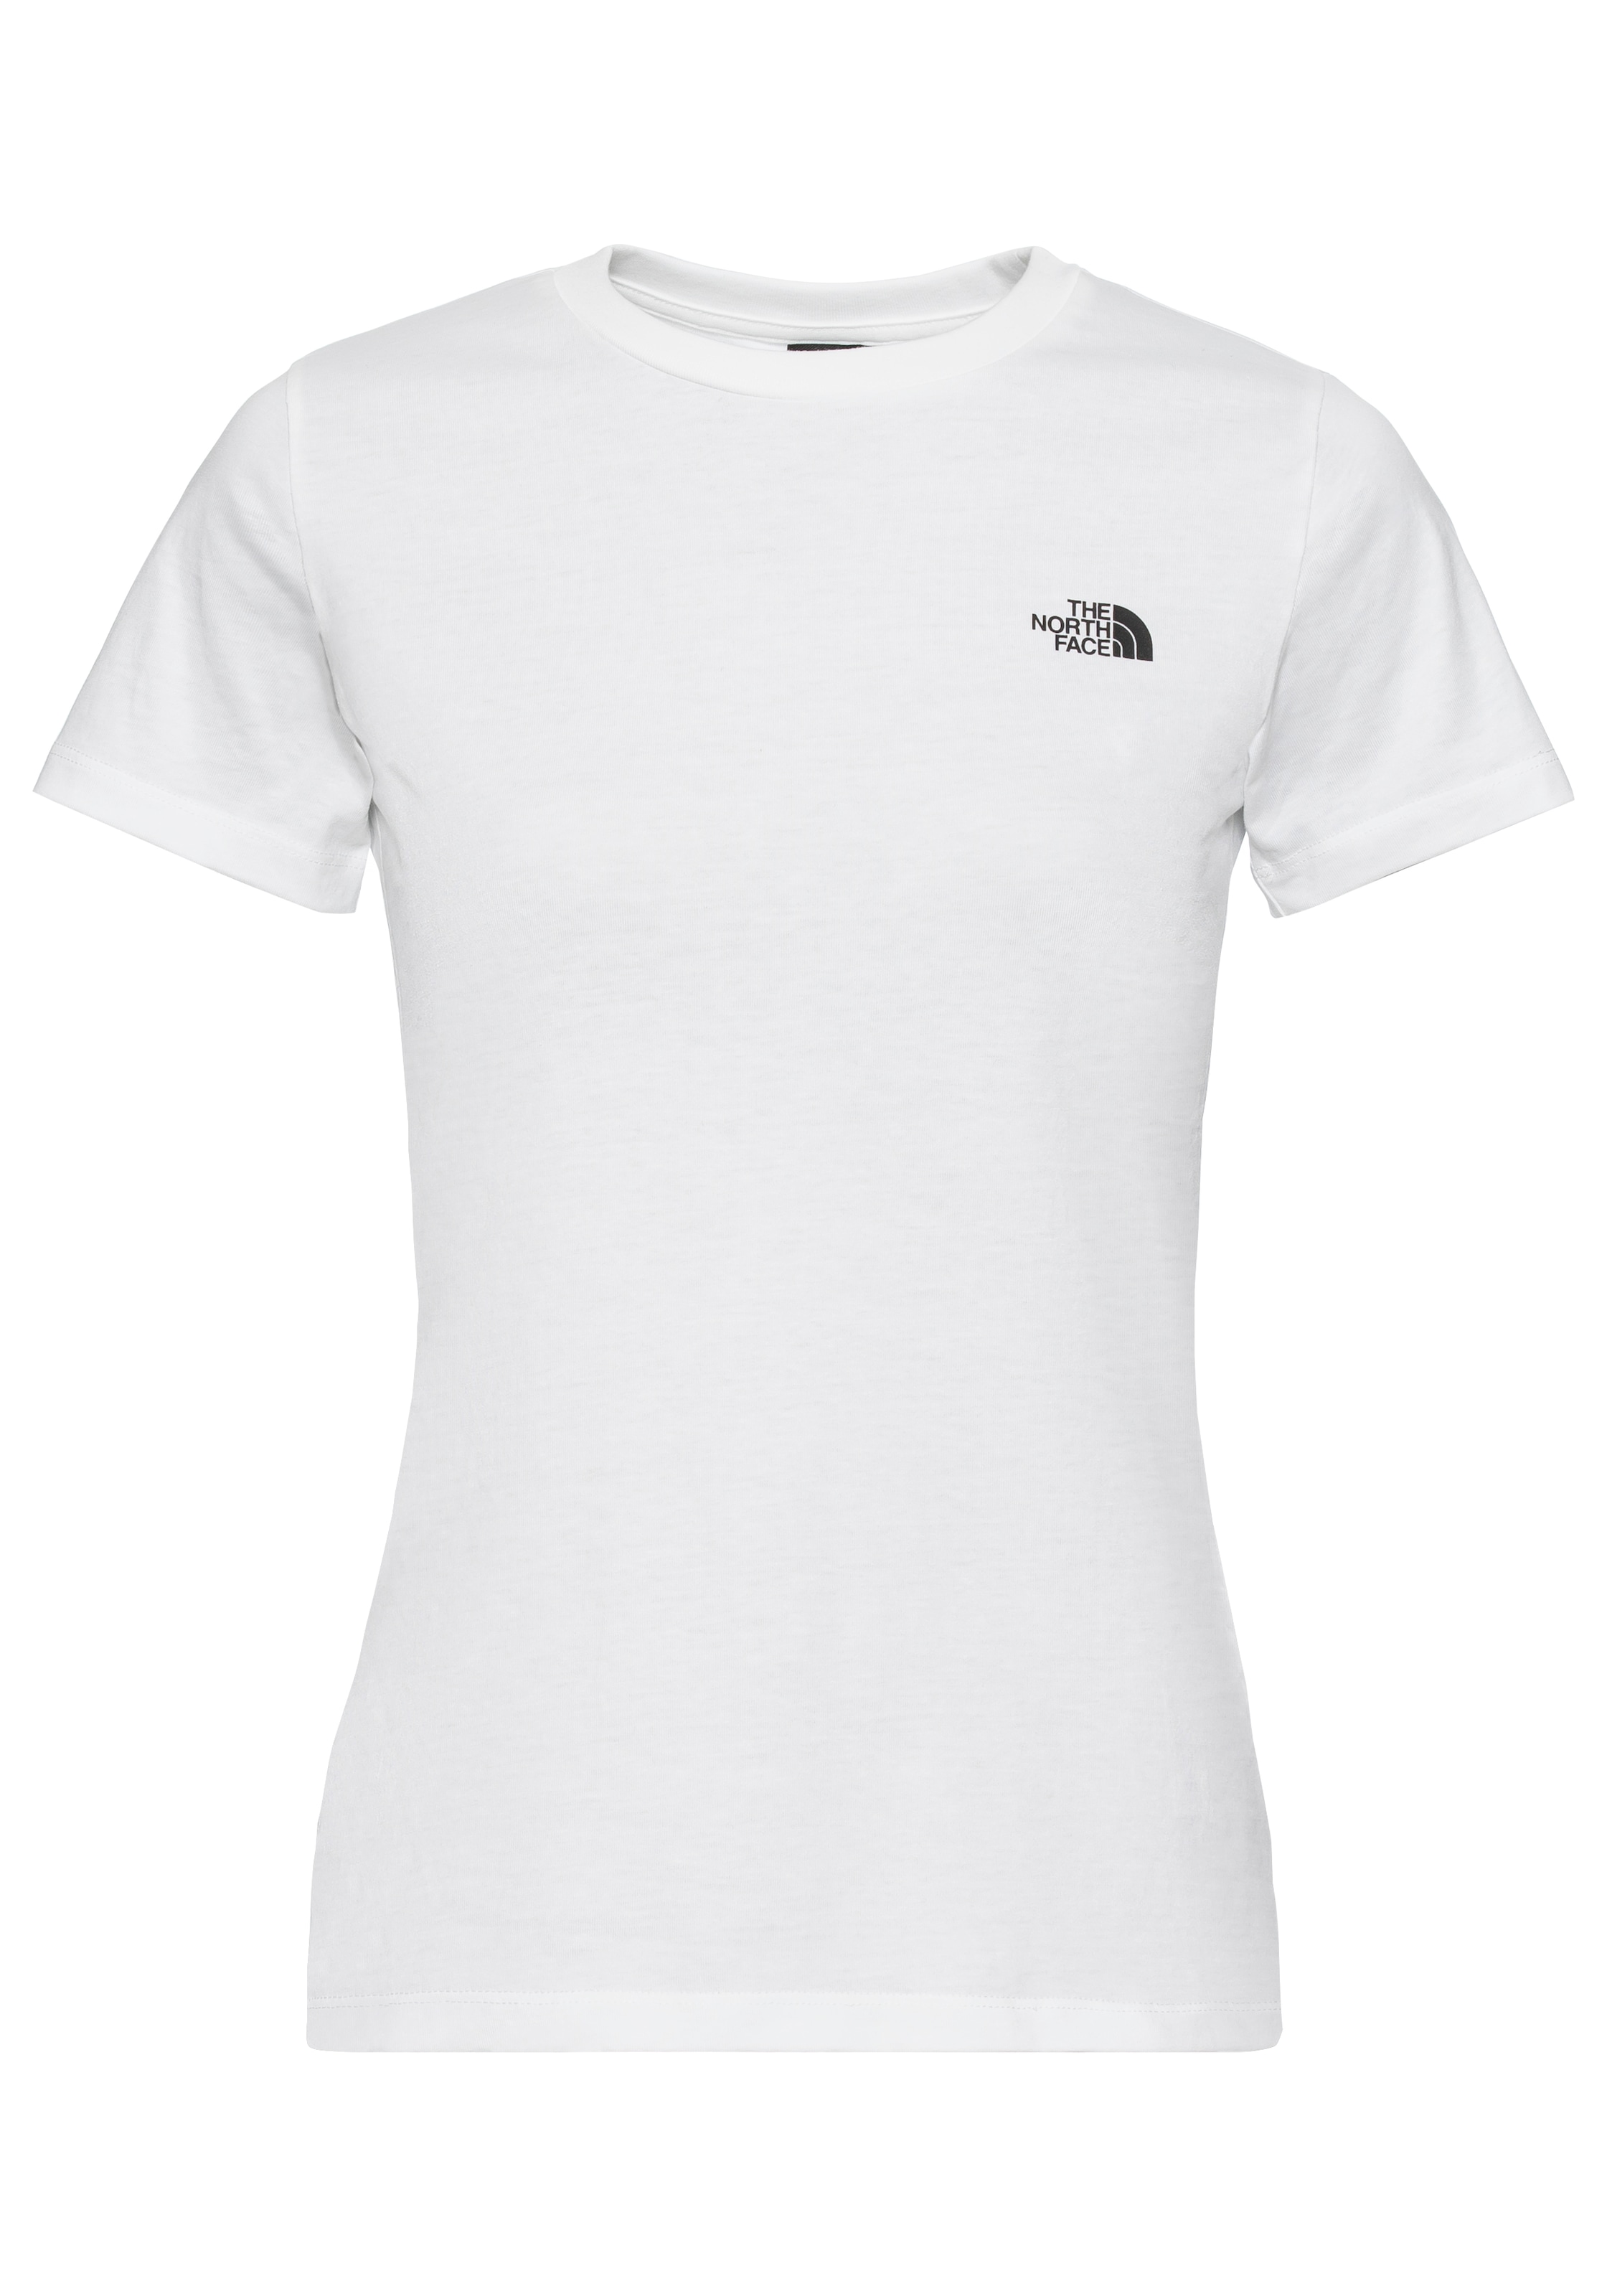 The North Face T-Shirt »W S/S SIMPLE DOME SLIM TEE«